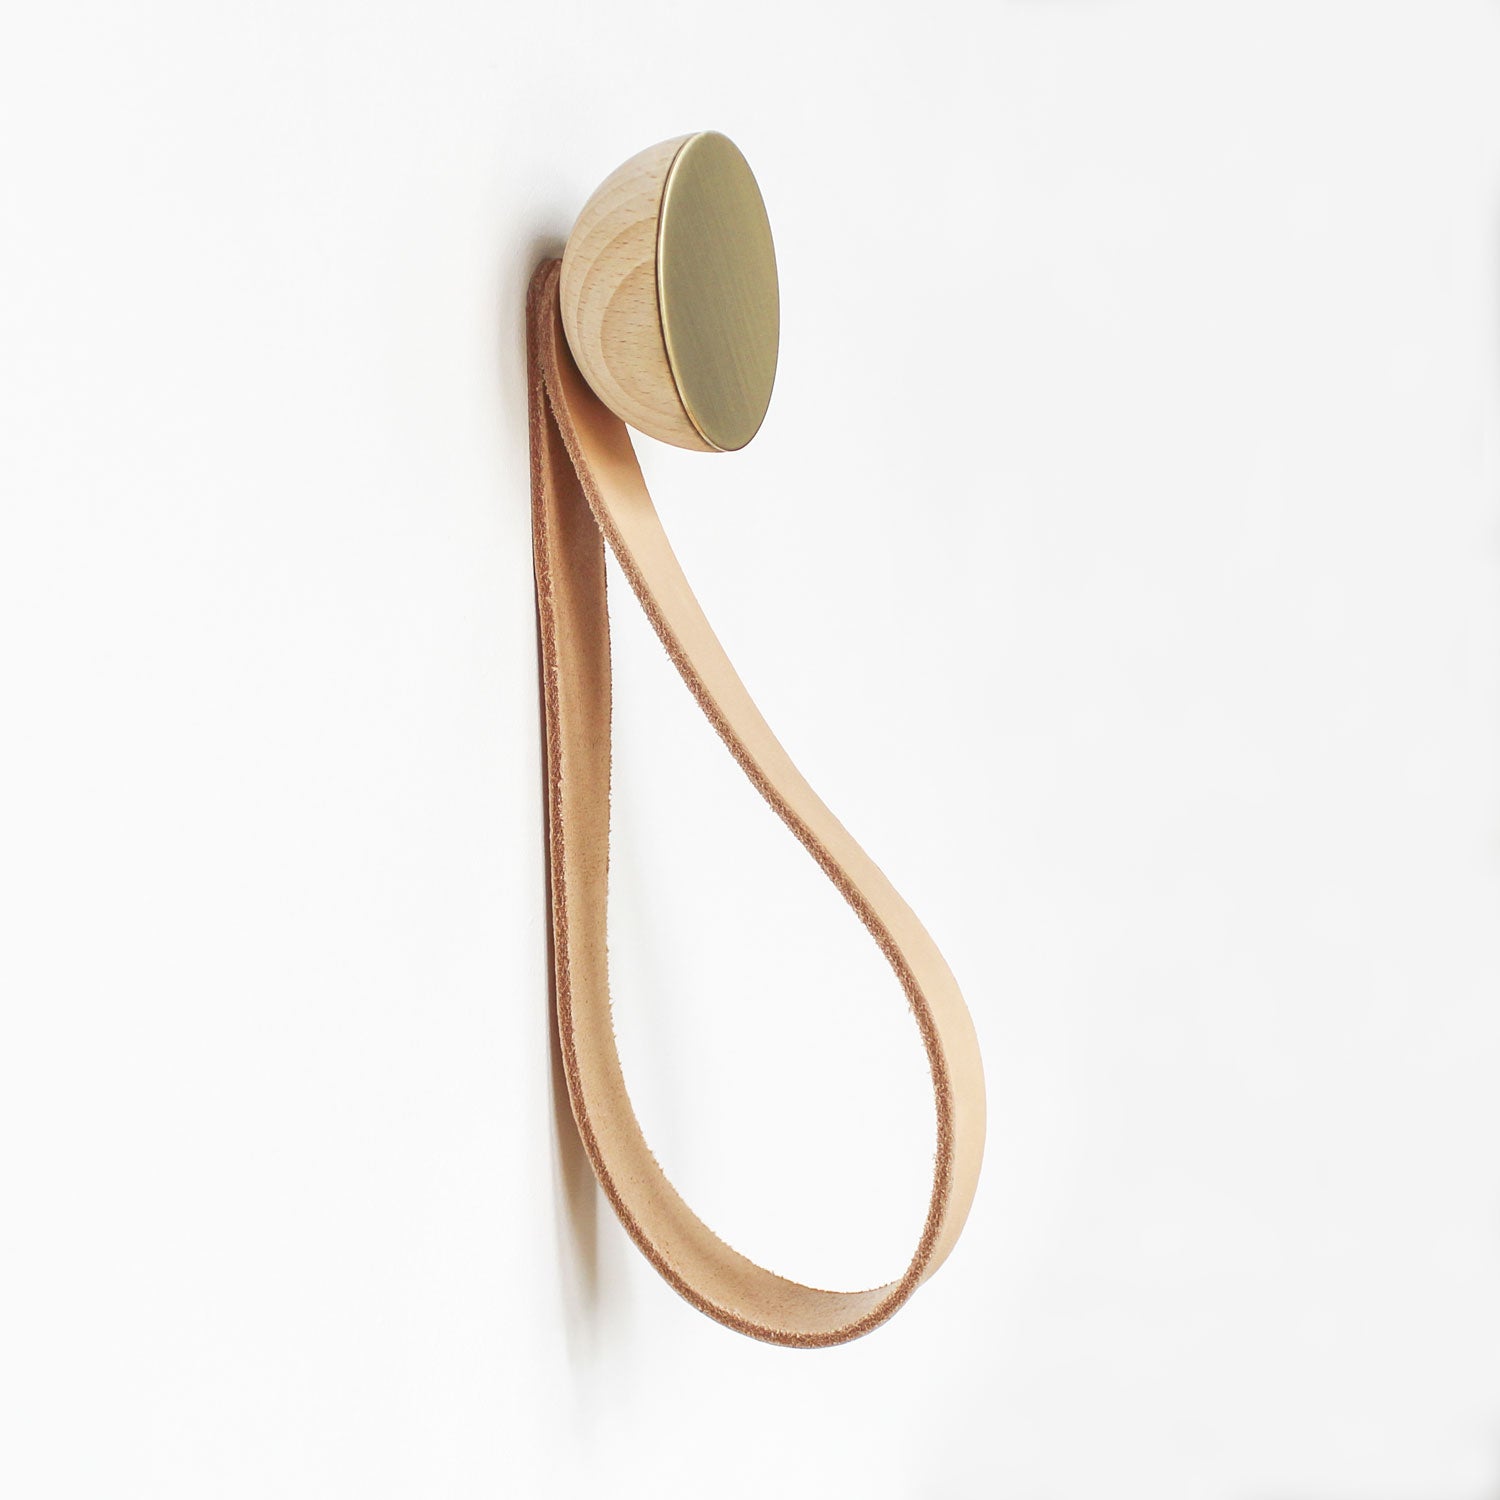 Round Beech Wood & Brass Wall Mounted Coat Hook / Hanger with Leather – 5mm  Paper